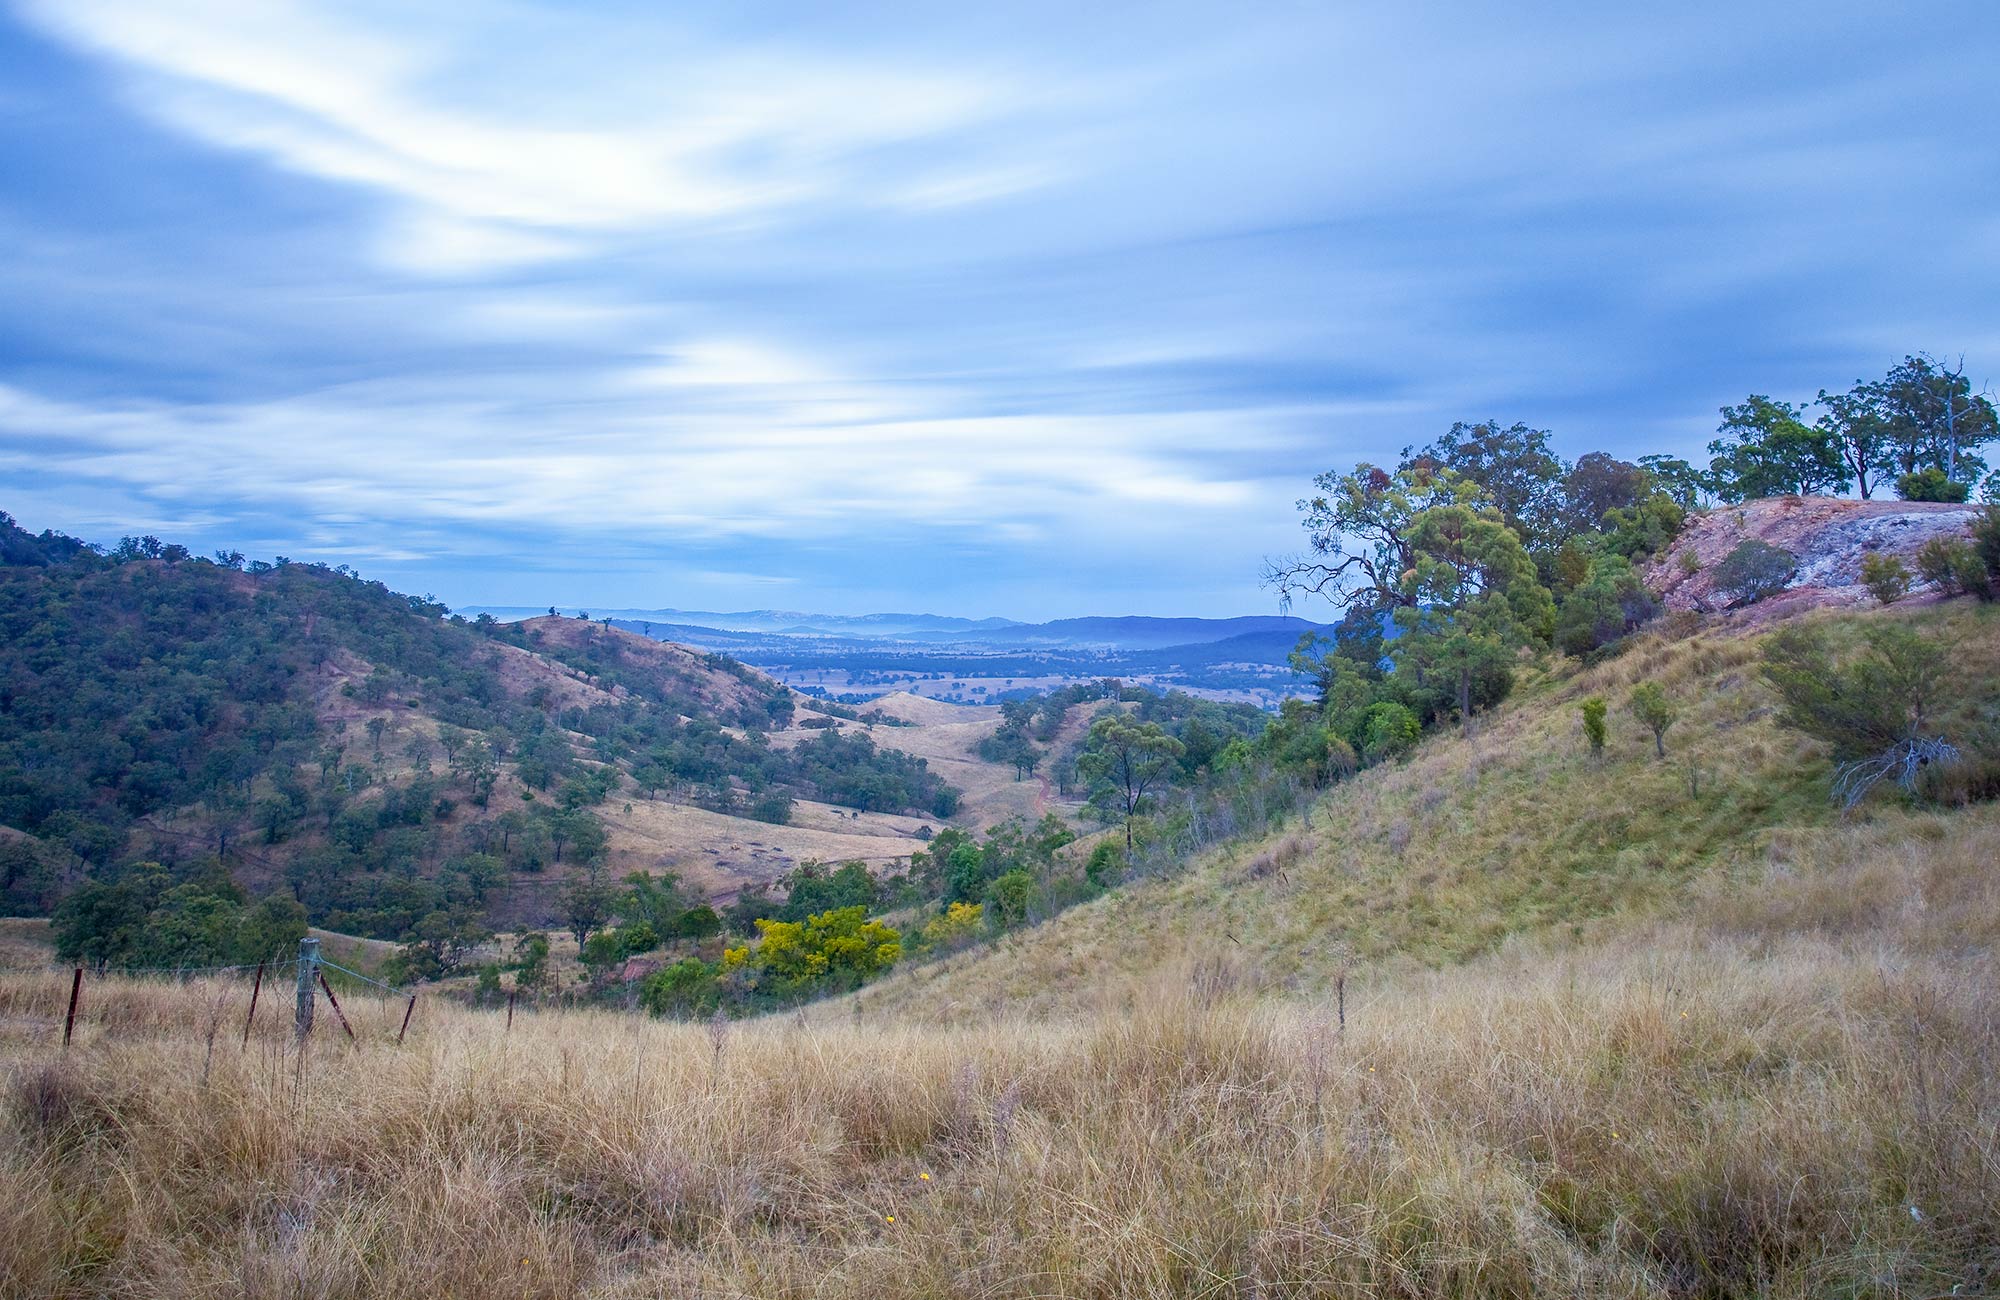 Burning Mountain Nature Reserve. Photo: Brent Mail